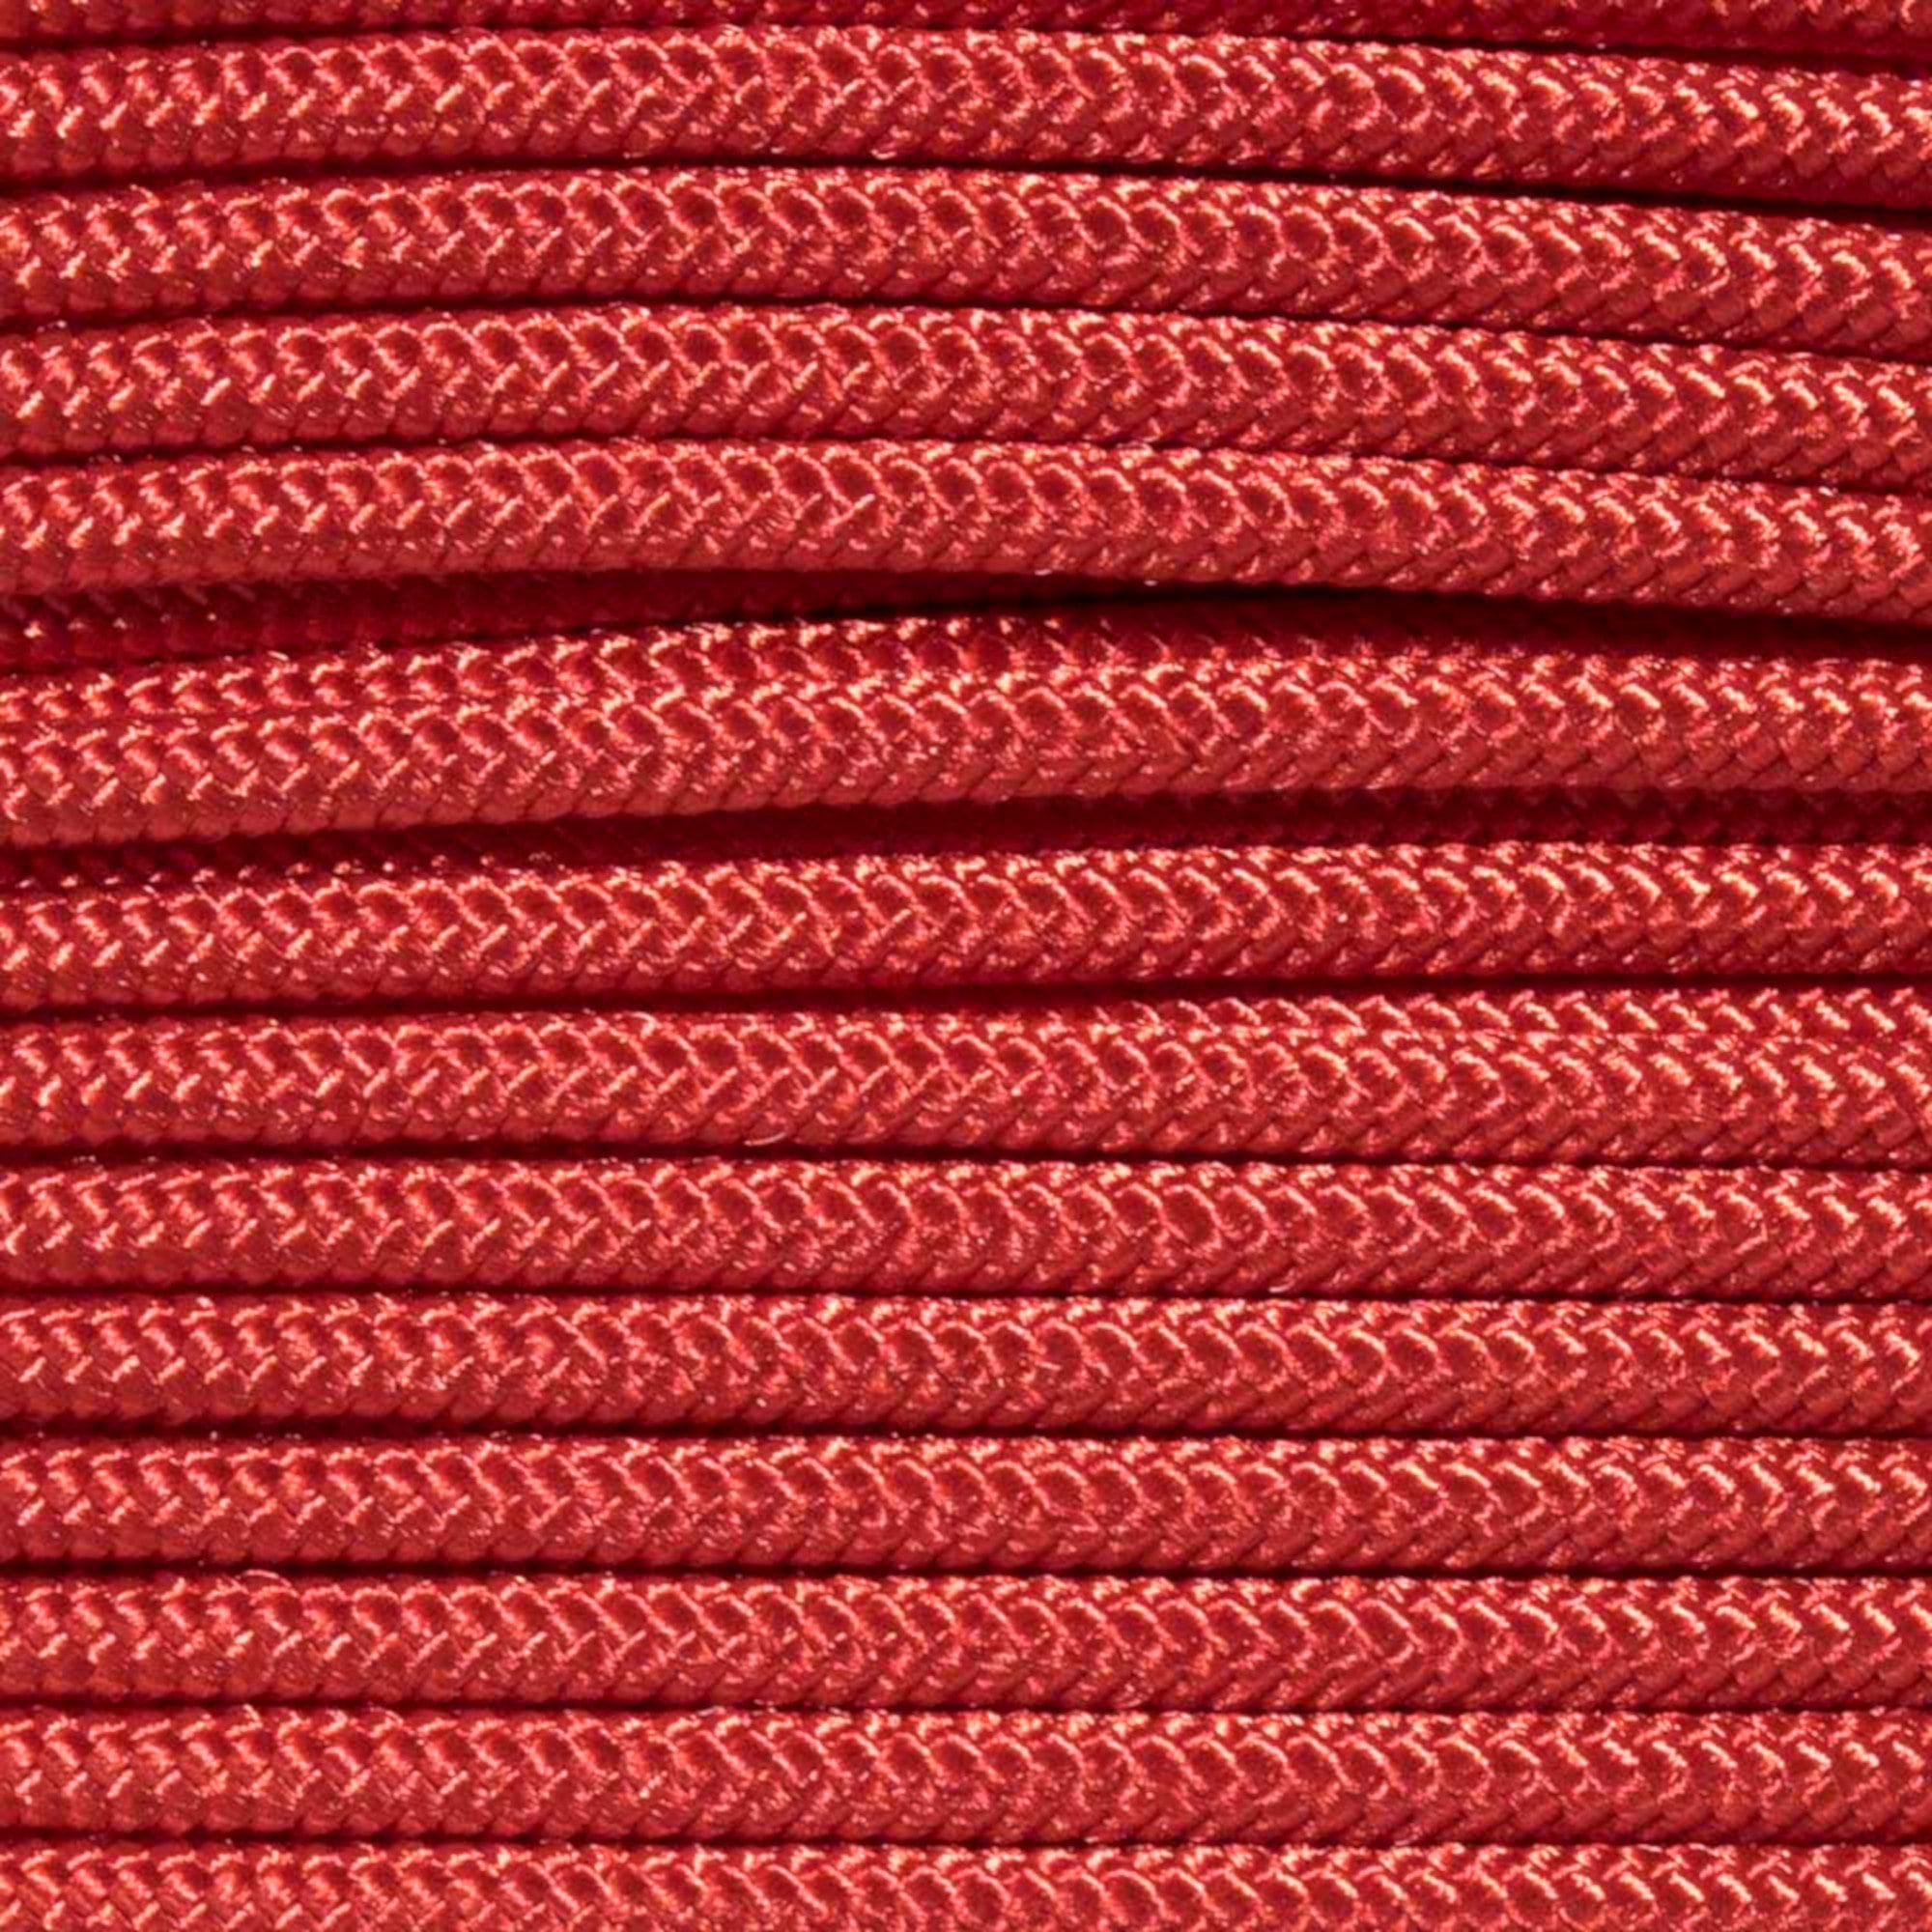 Golberg Premium Polyester Accessory Cord - USA Made Smooth Braid Minimal  Stretch Rope - Sizes of 3mm, 4mm, 5mm, or 6mm - Lengths of 25, 50, 100, 250,  and 1000 Feet - Compact and Lightweight Cord 